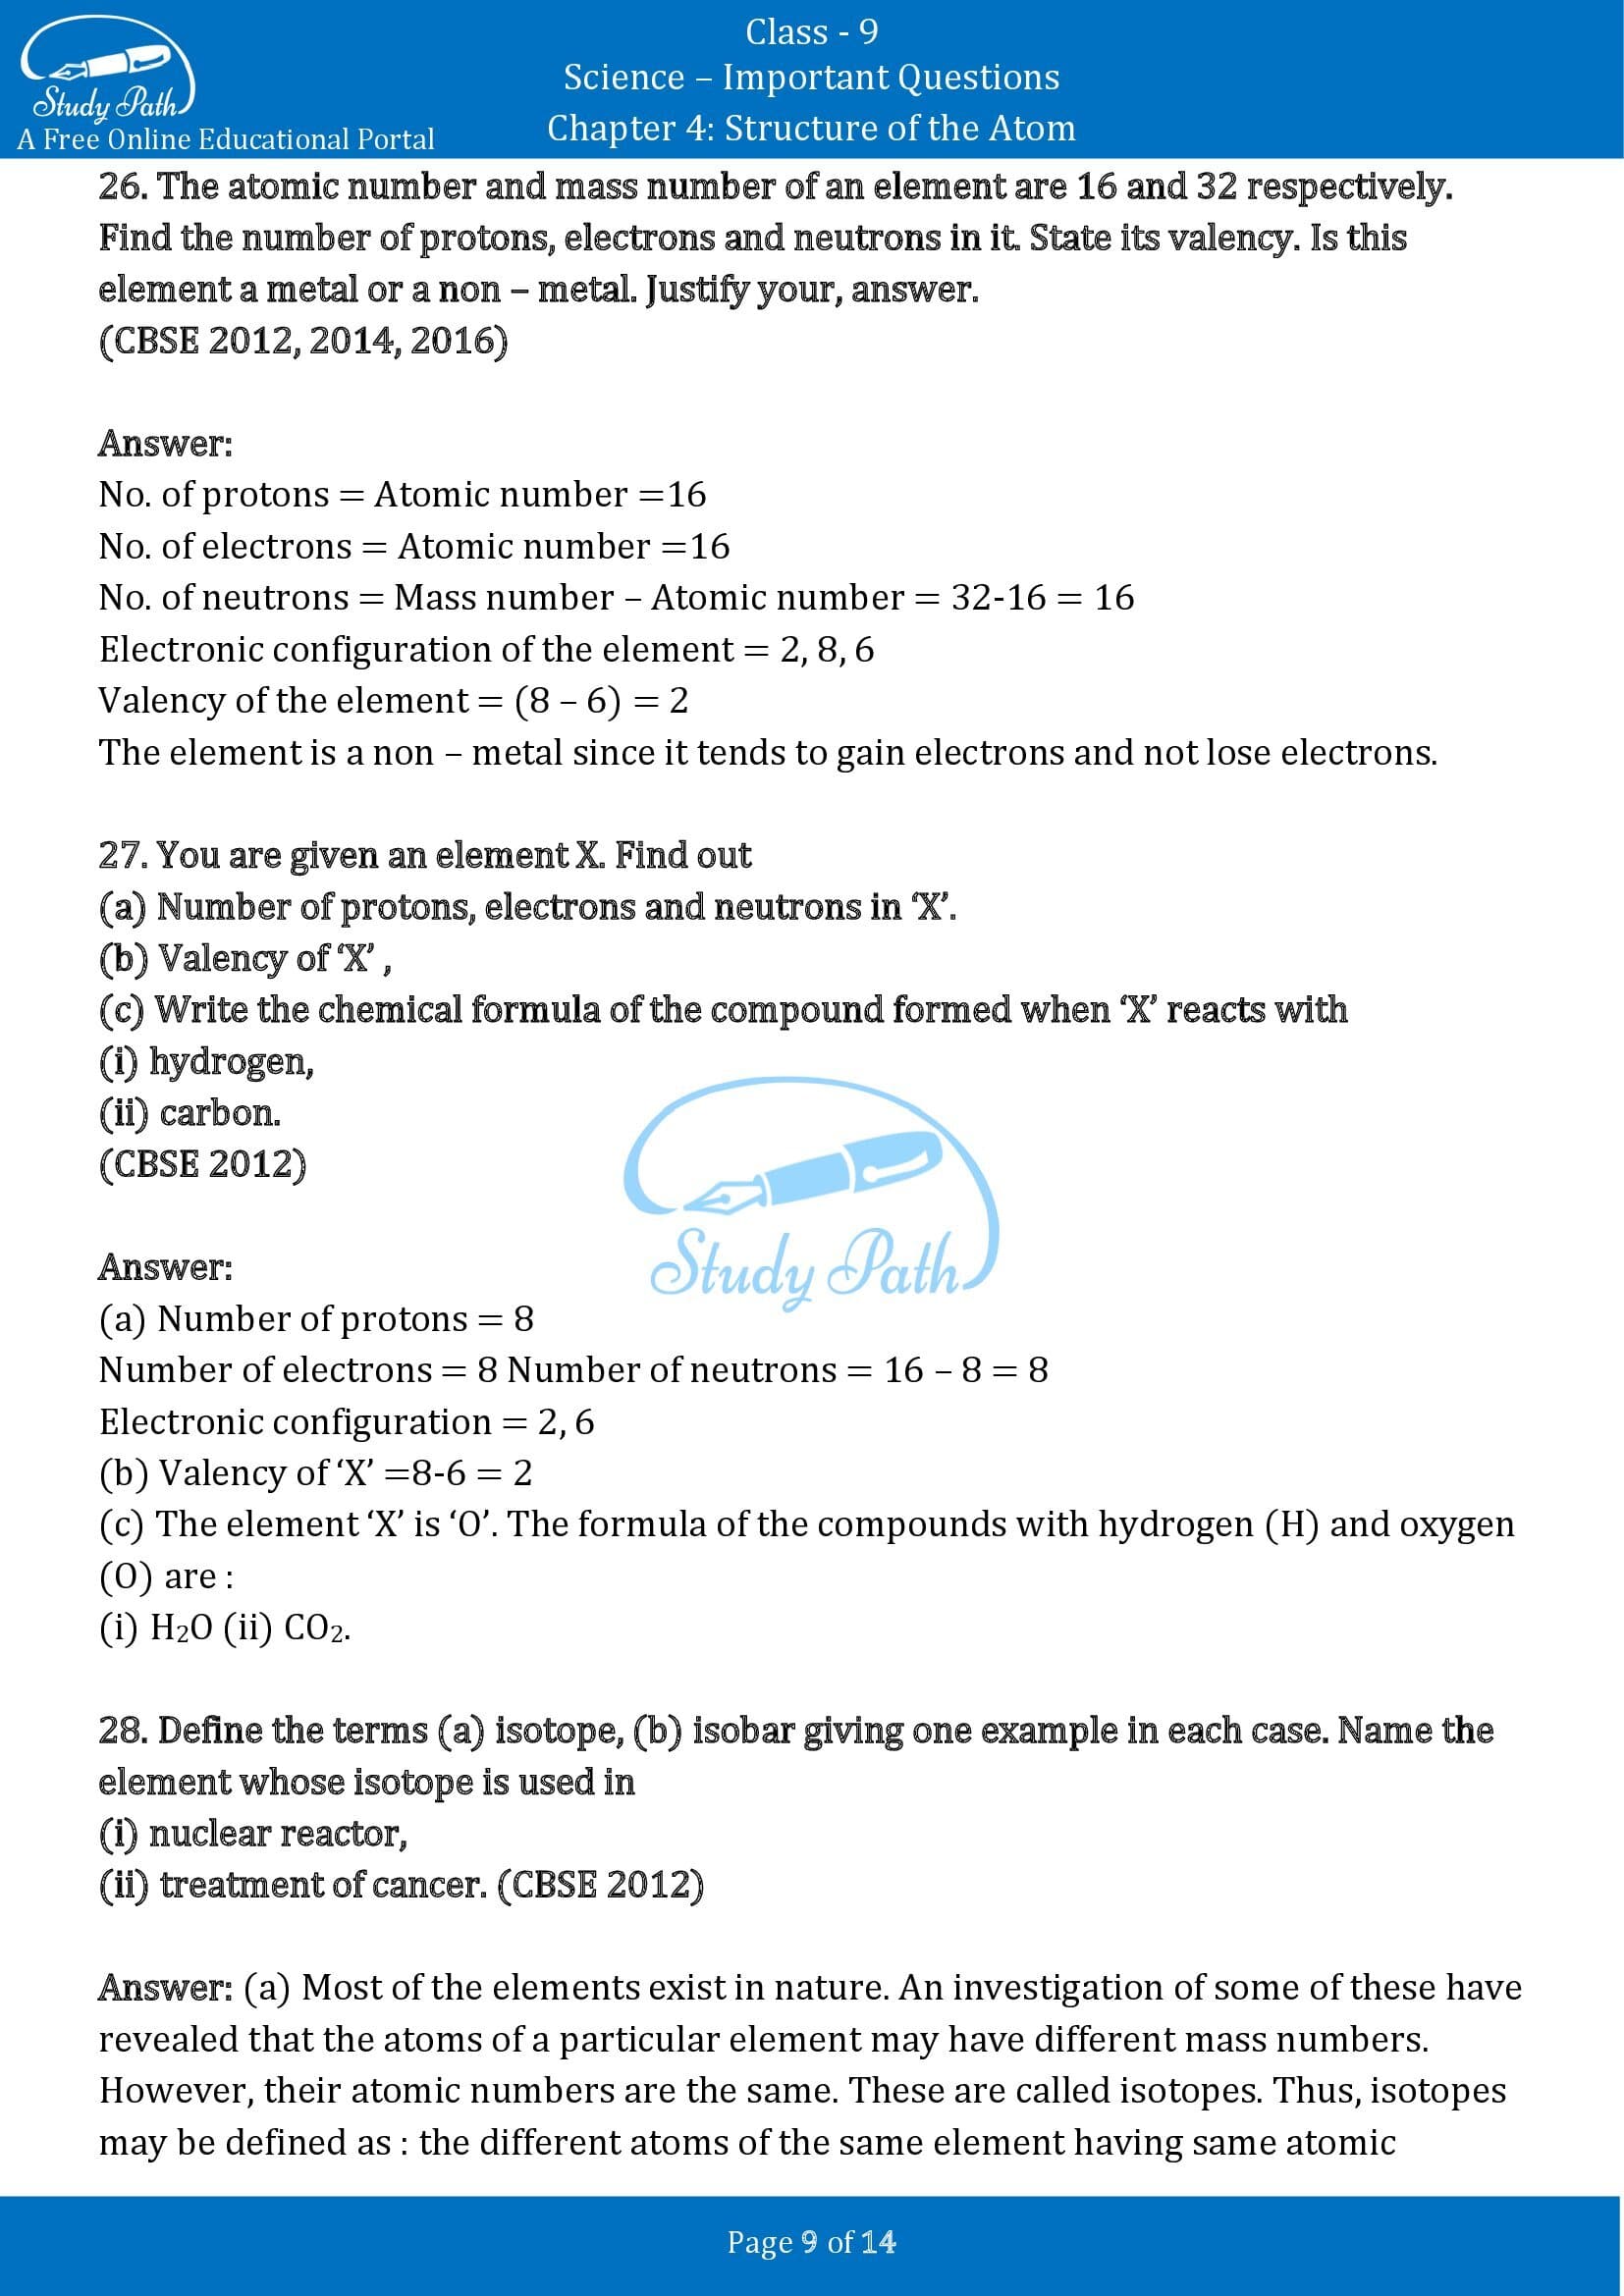 Important Questions for Class 9 Science Chapter 4 Structure of the Atom 00009